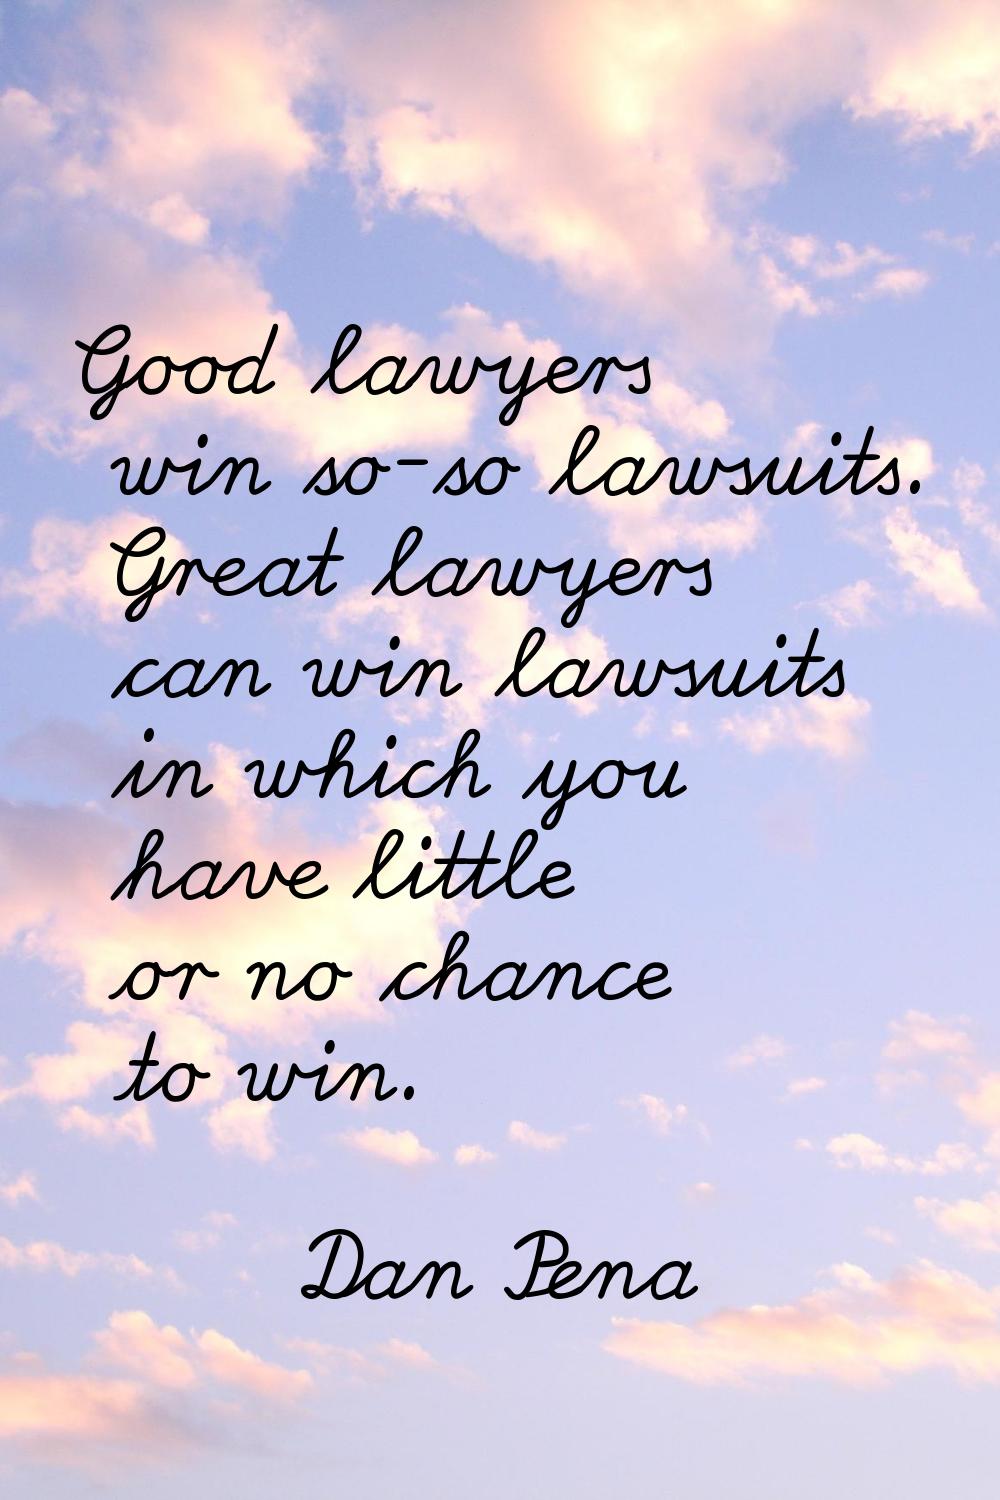 Good lawyers win so-so lawsuits. Great lawyers can win lawsuits in which you have little or no chan